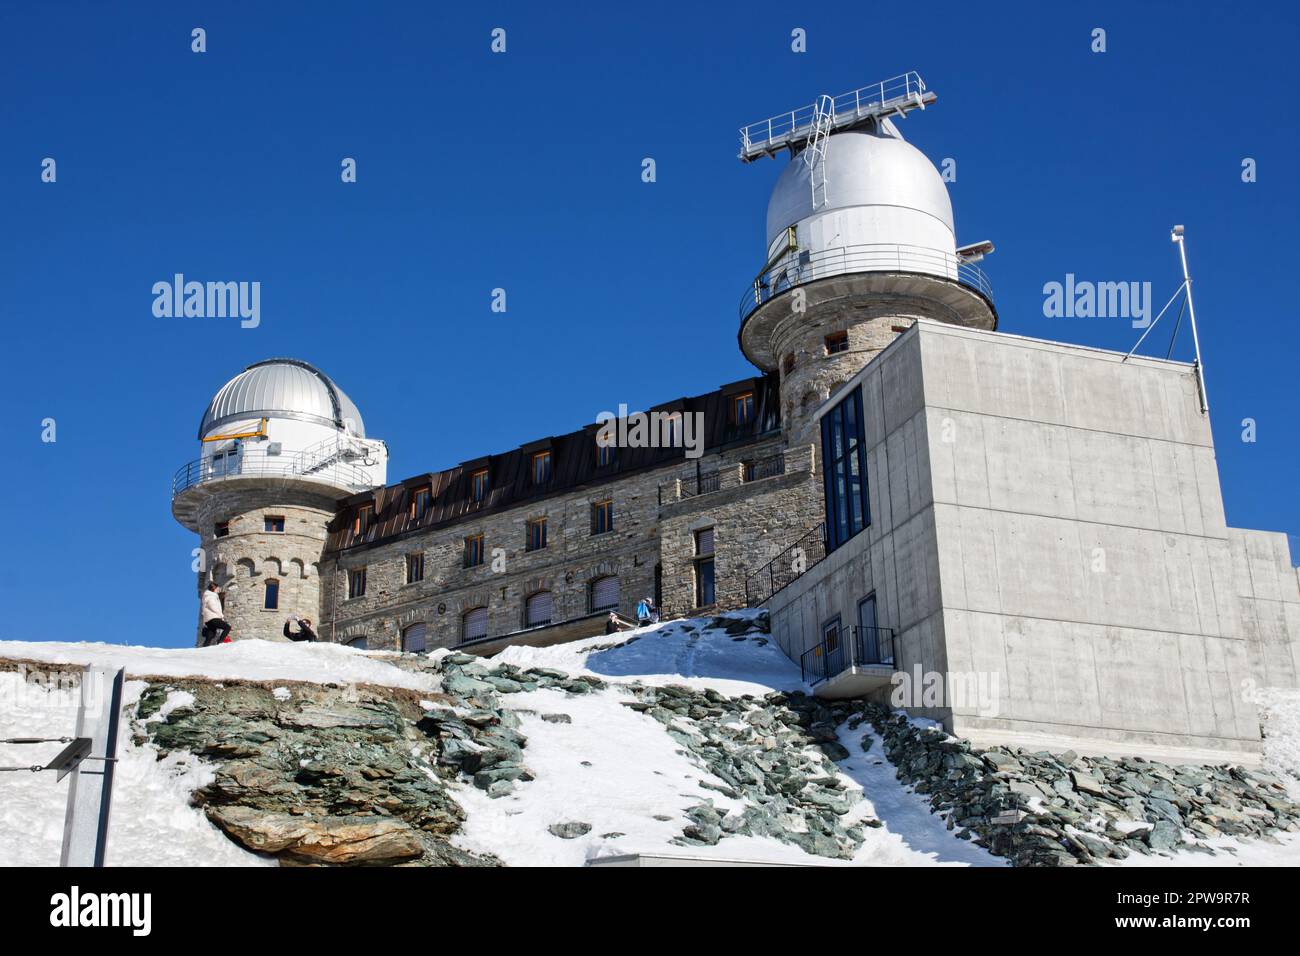 The observatory on top of Gornergrat in the Swiss Alps Stock Photo